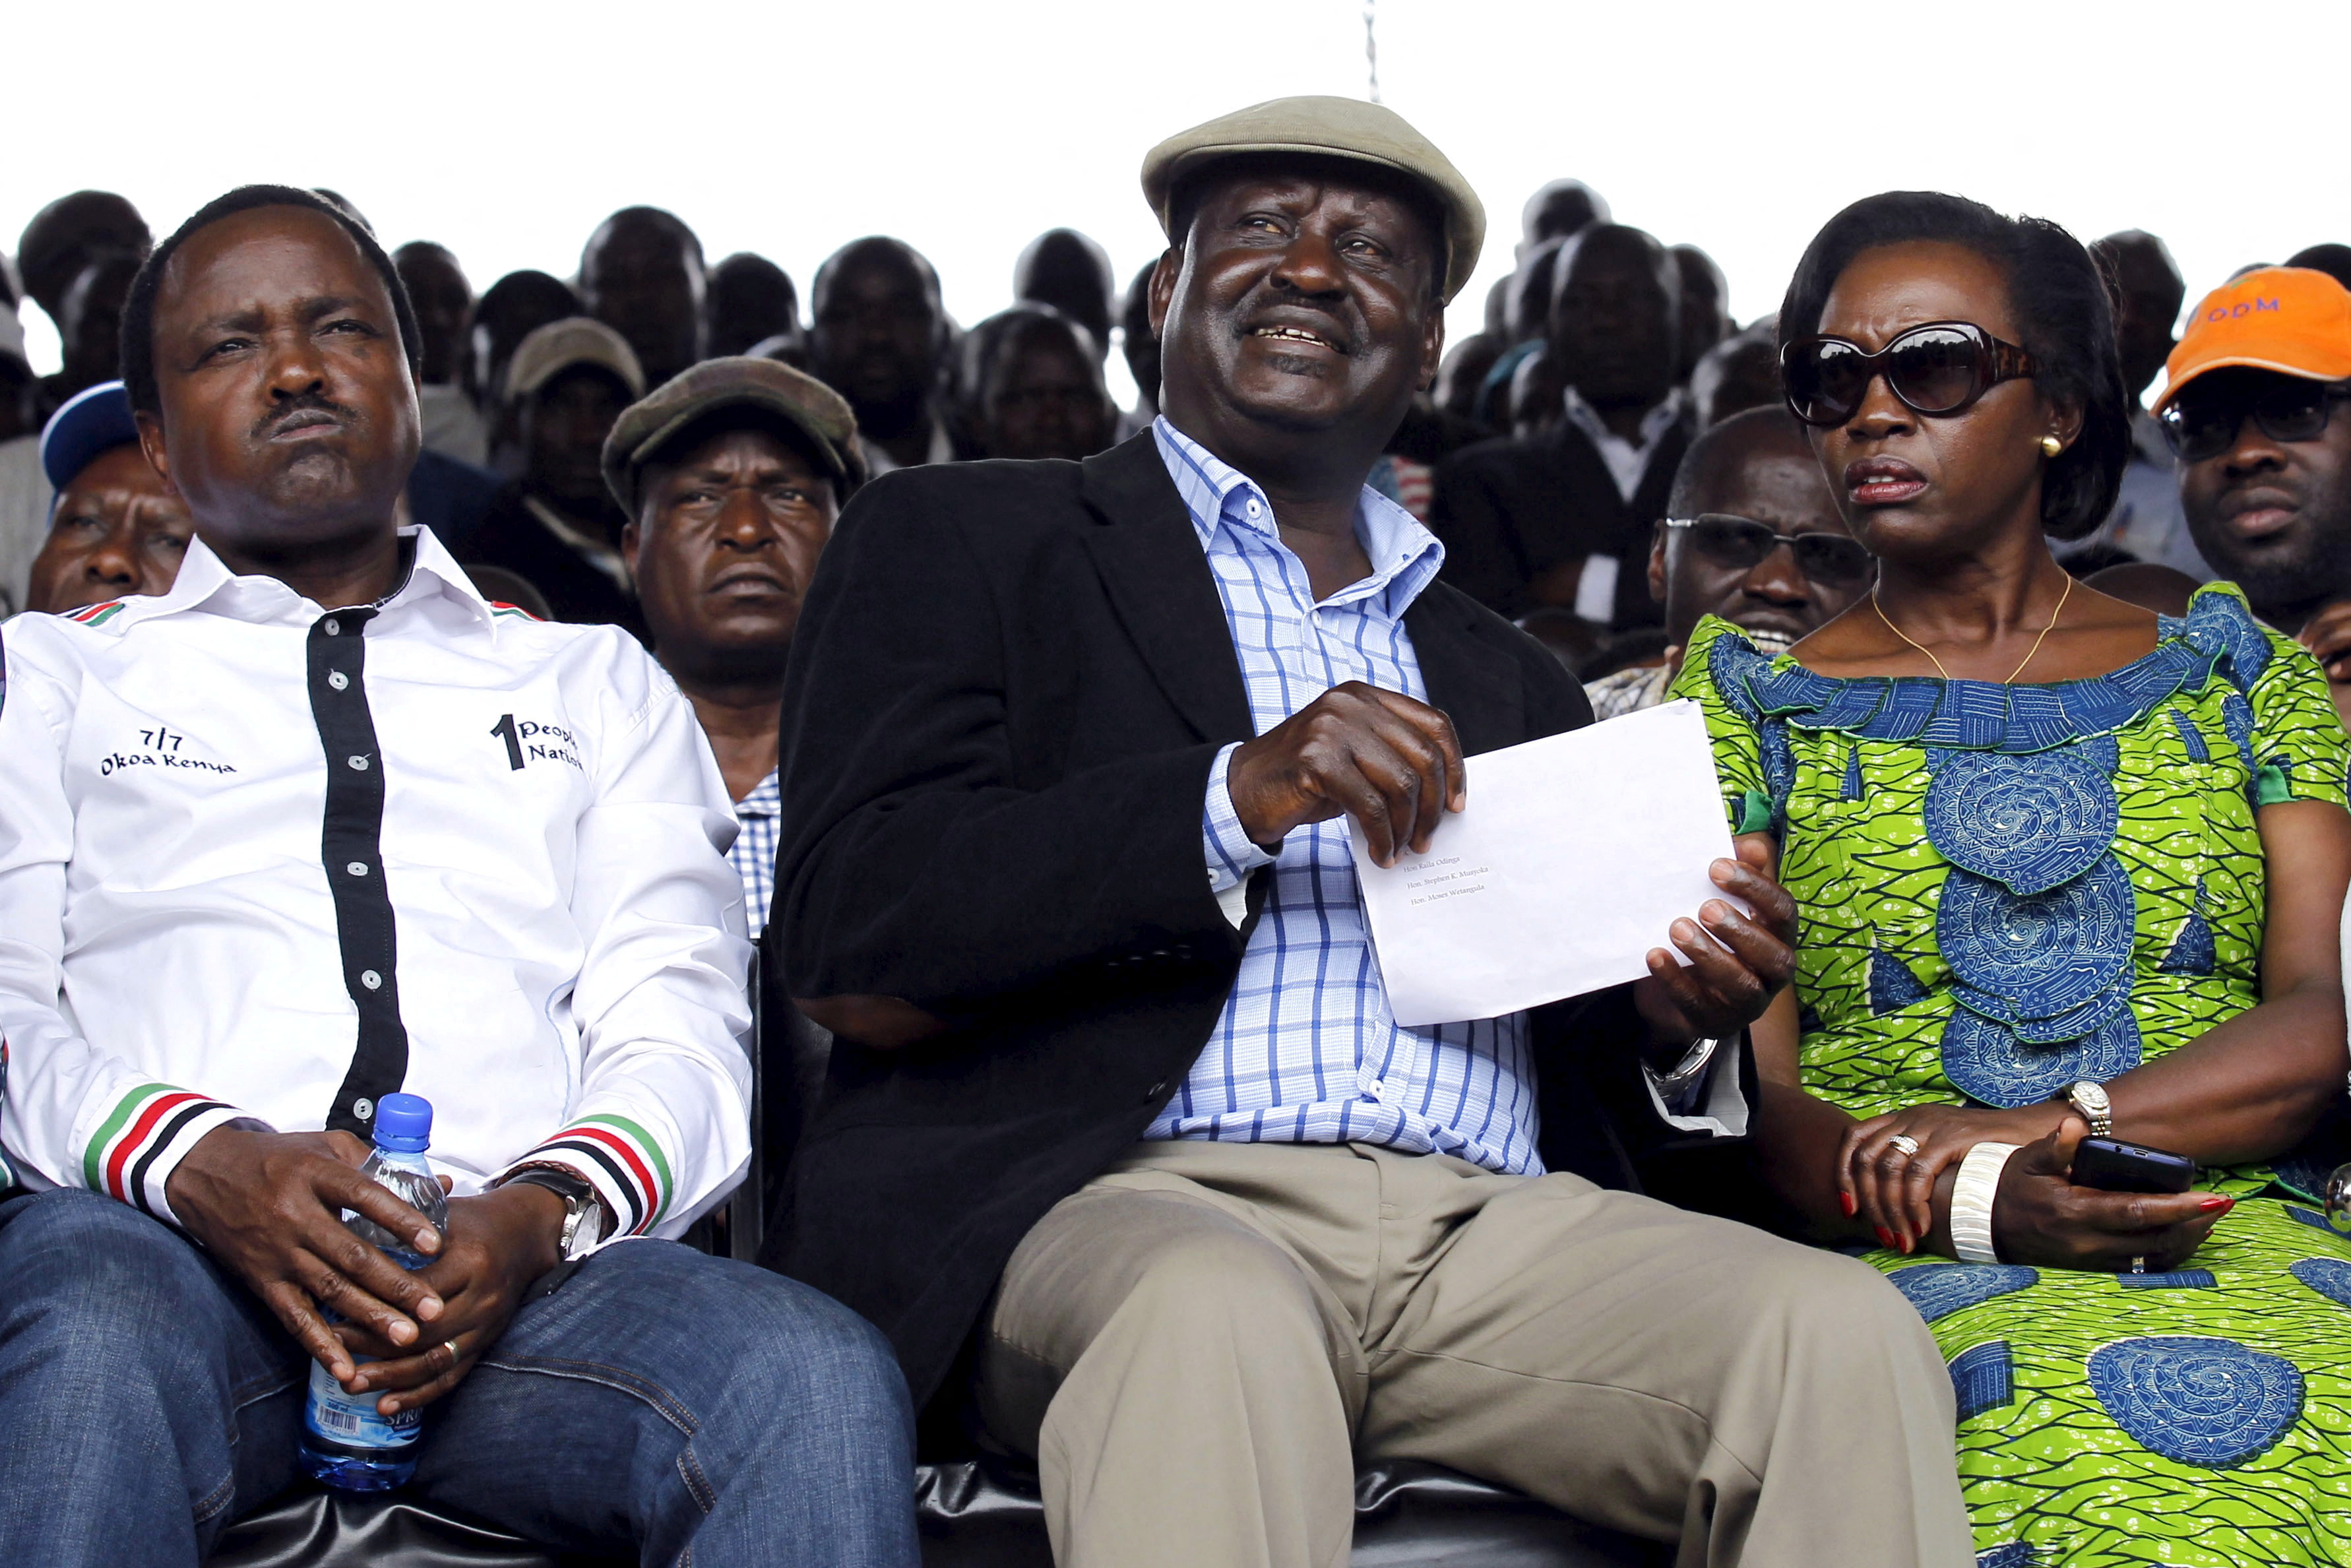 Raila Odinga, leader of Kenya's opposition CORD, attends a rally in solidarity with teachers currently engaged in a national striker over a pay increase dispute at the Uhuru Park grounds, in the capital Nairobi